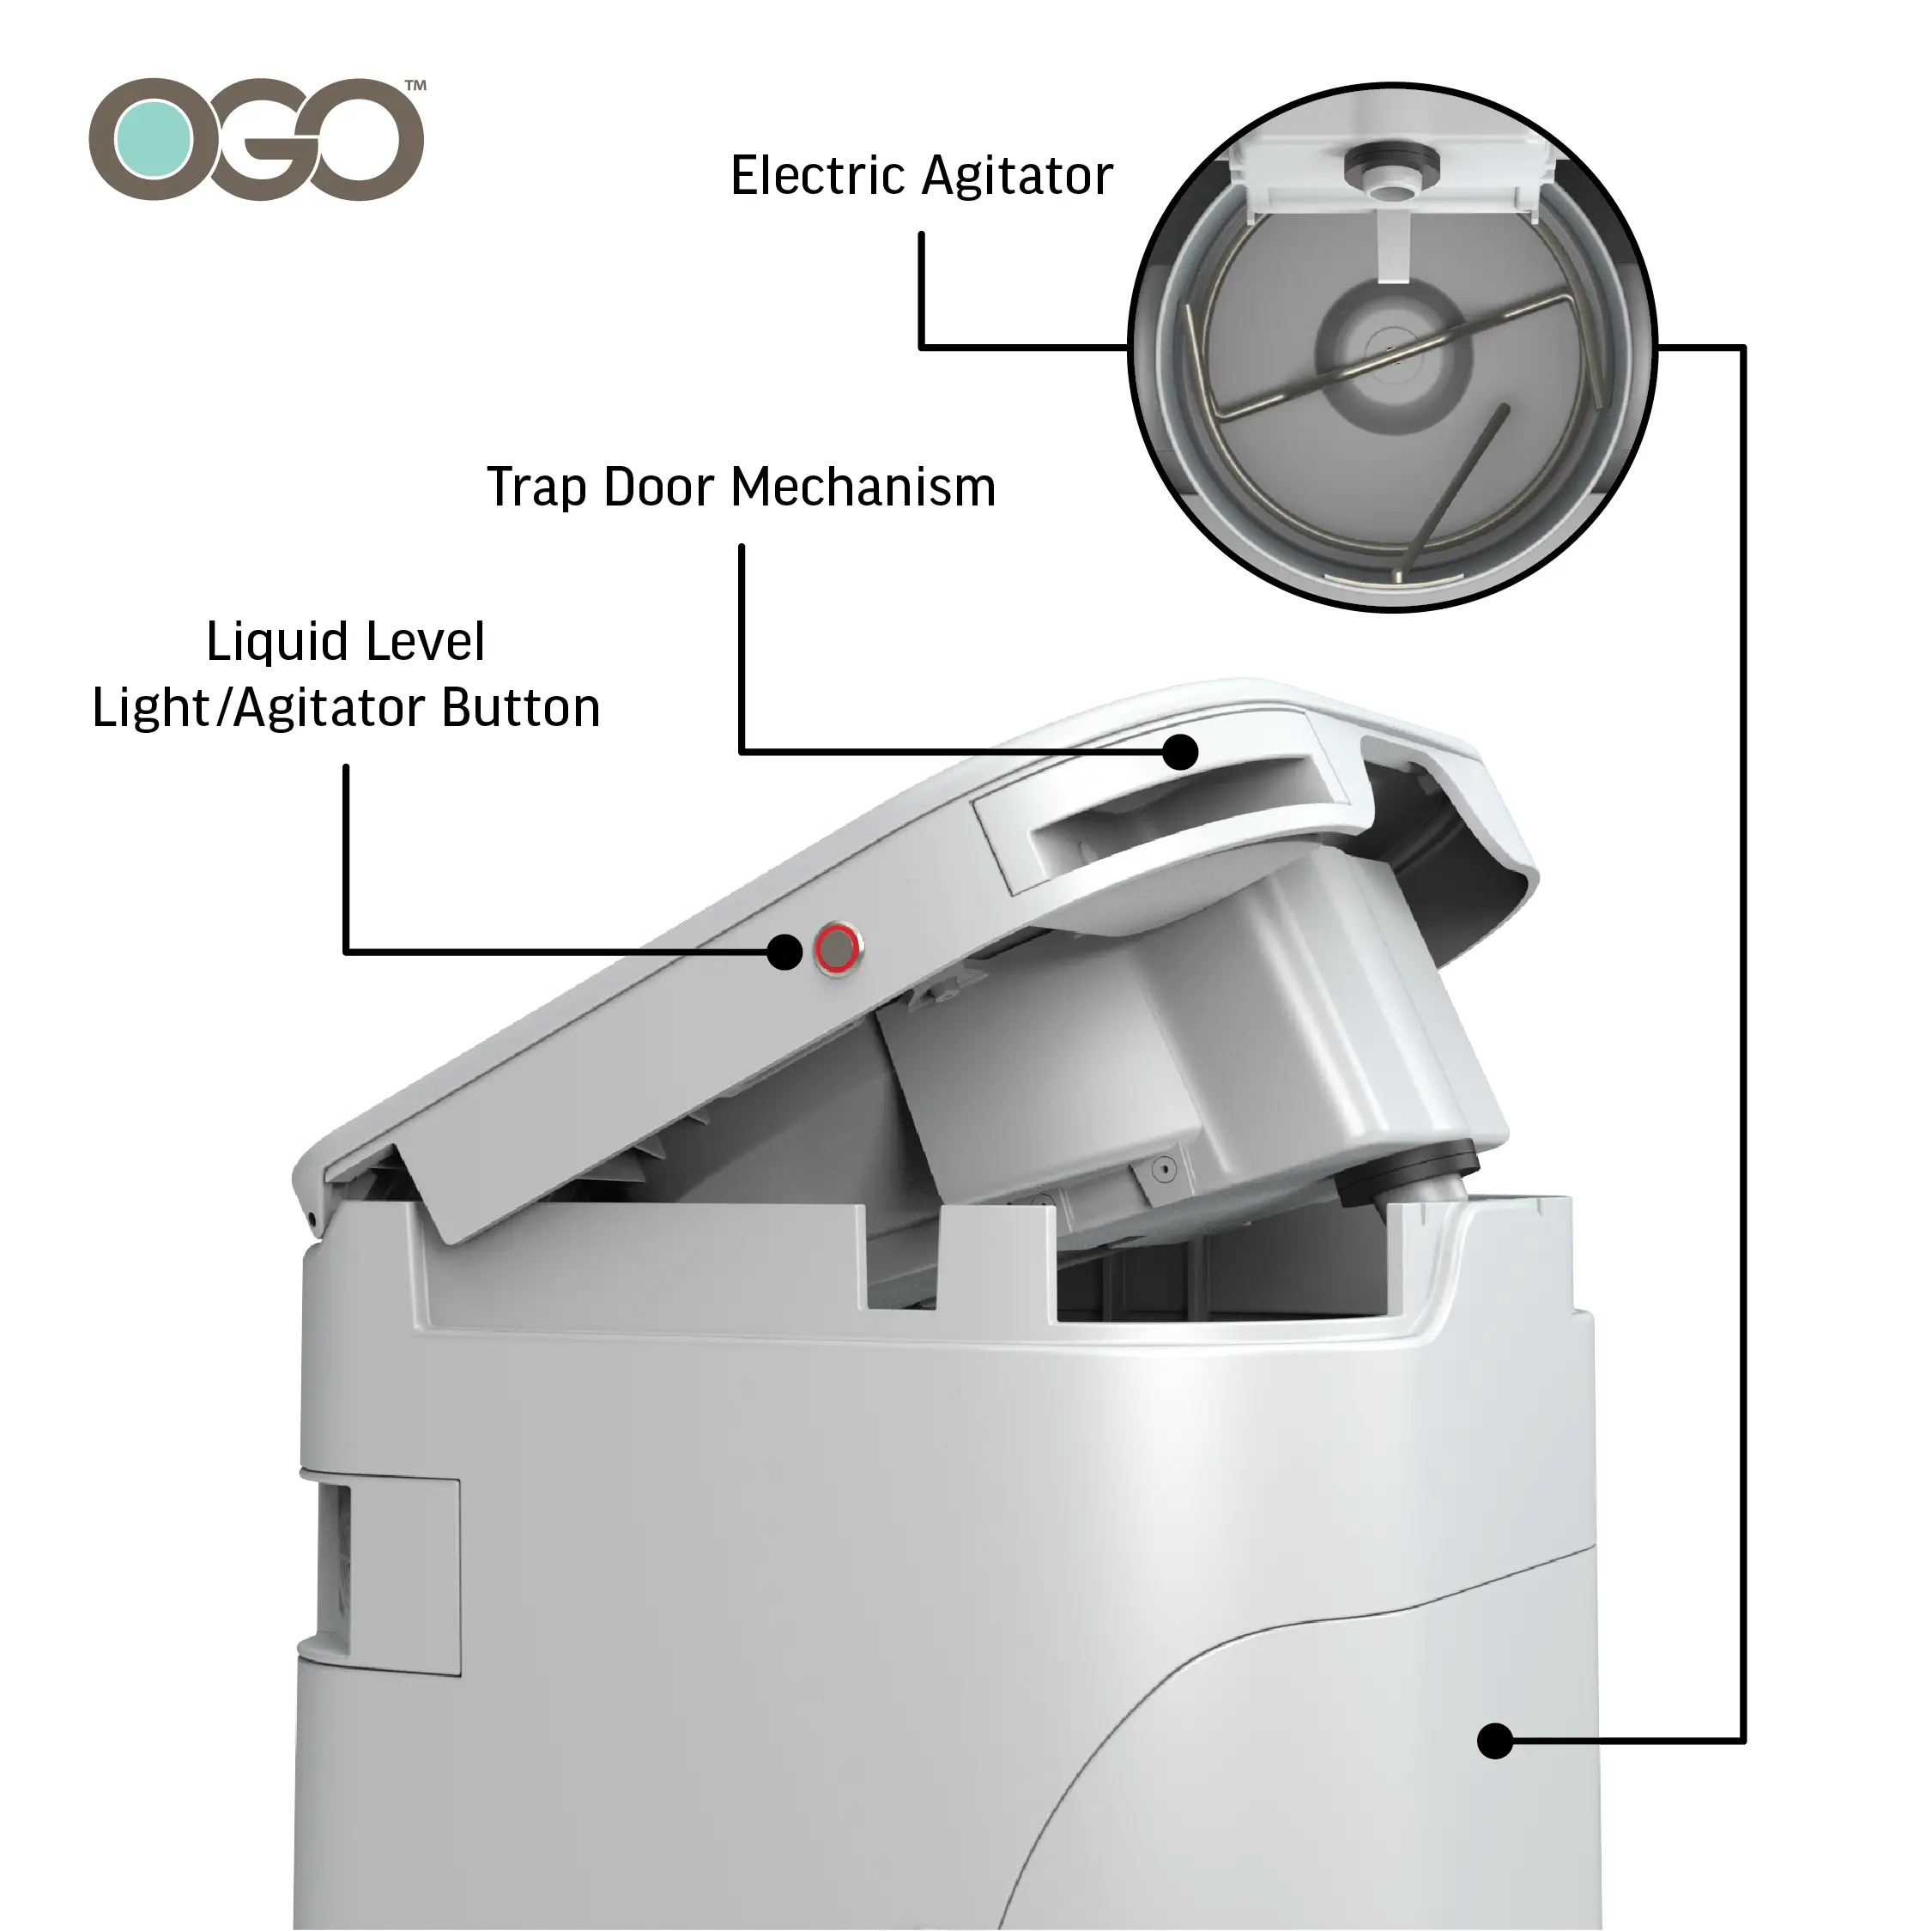 Overview of the OGO Toilet product